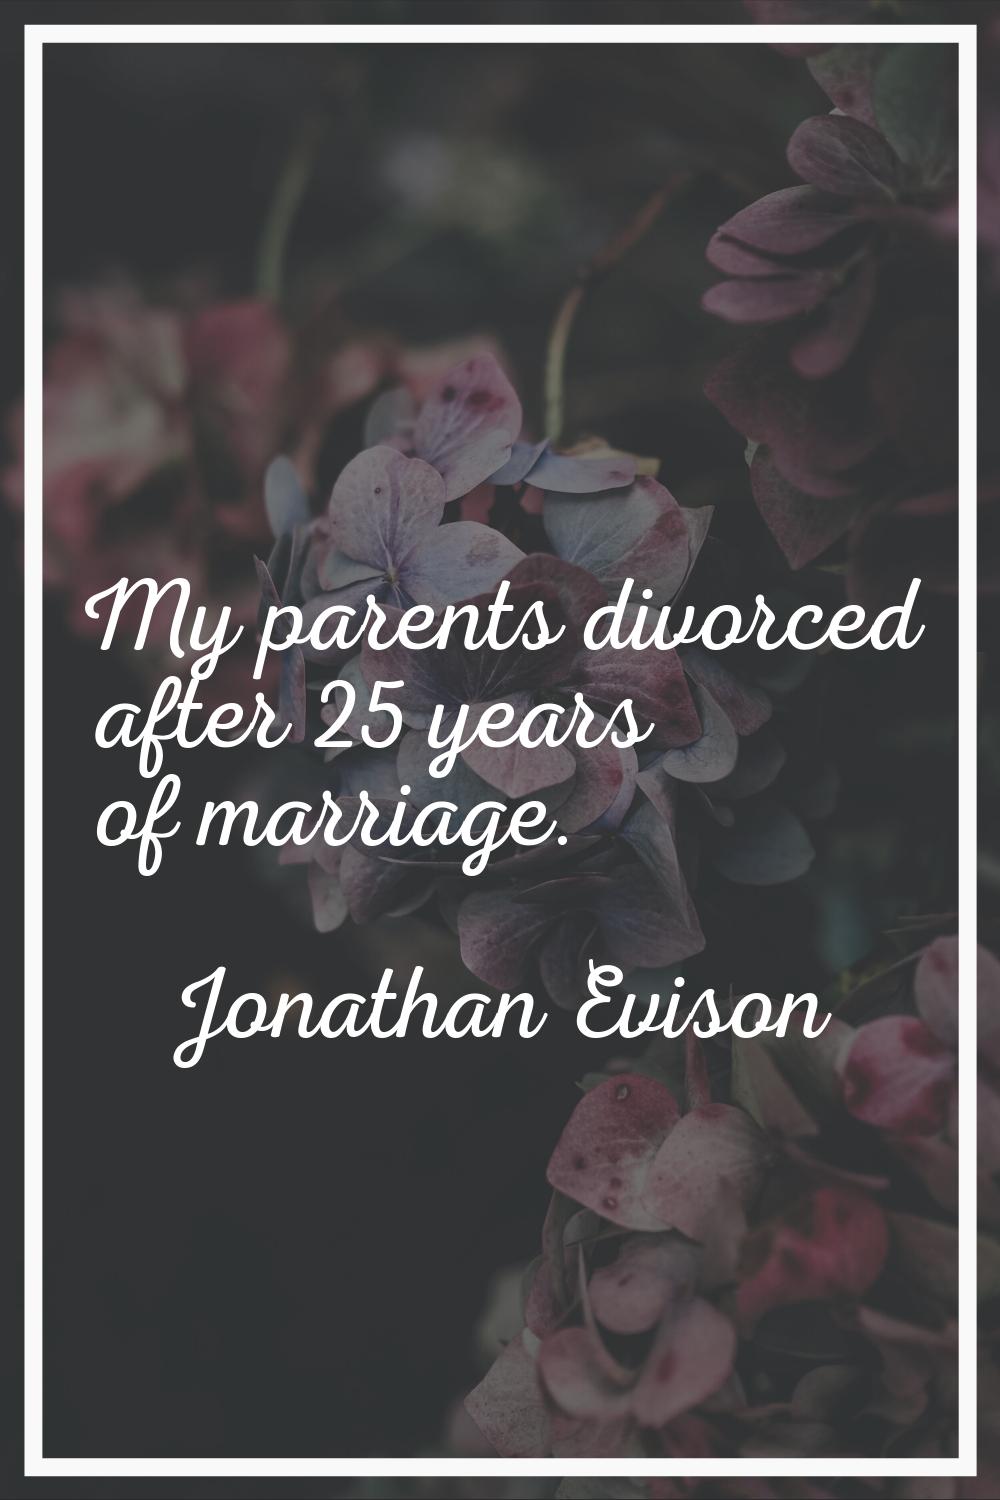 My parents divorced after 25 years of marriage.